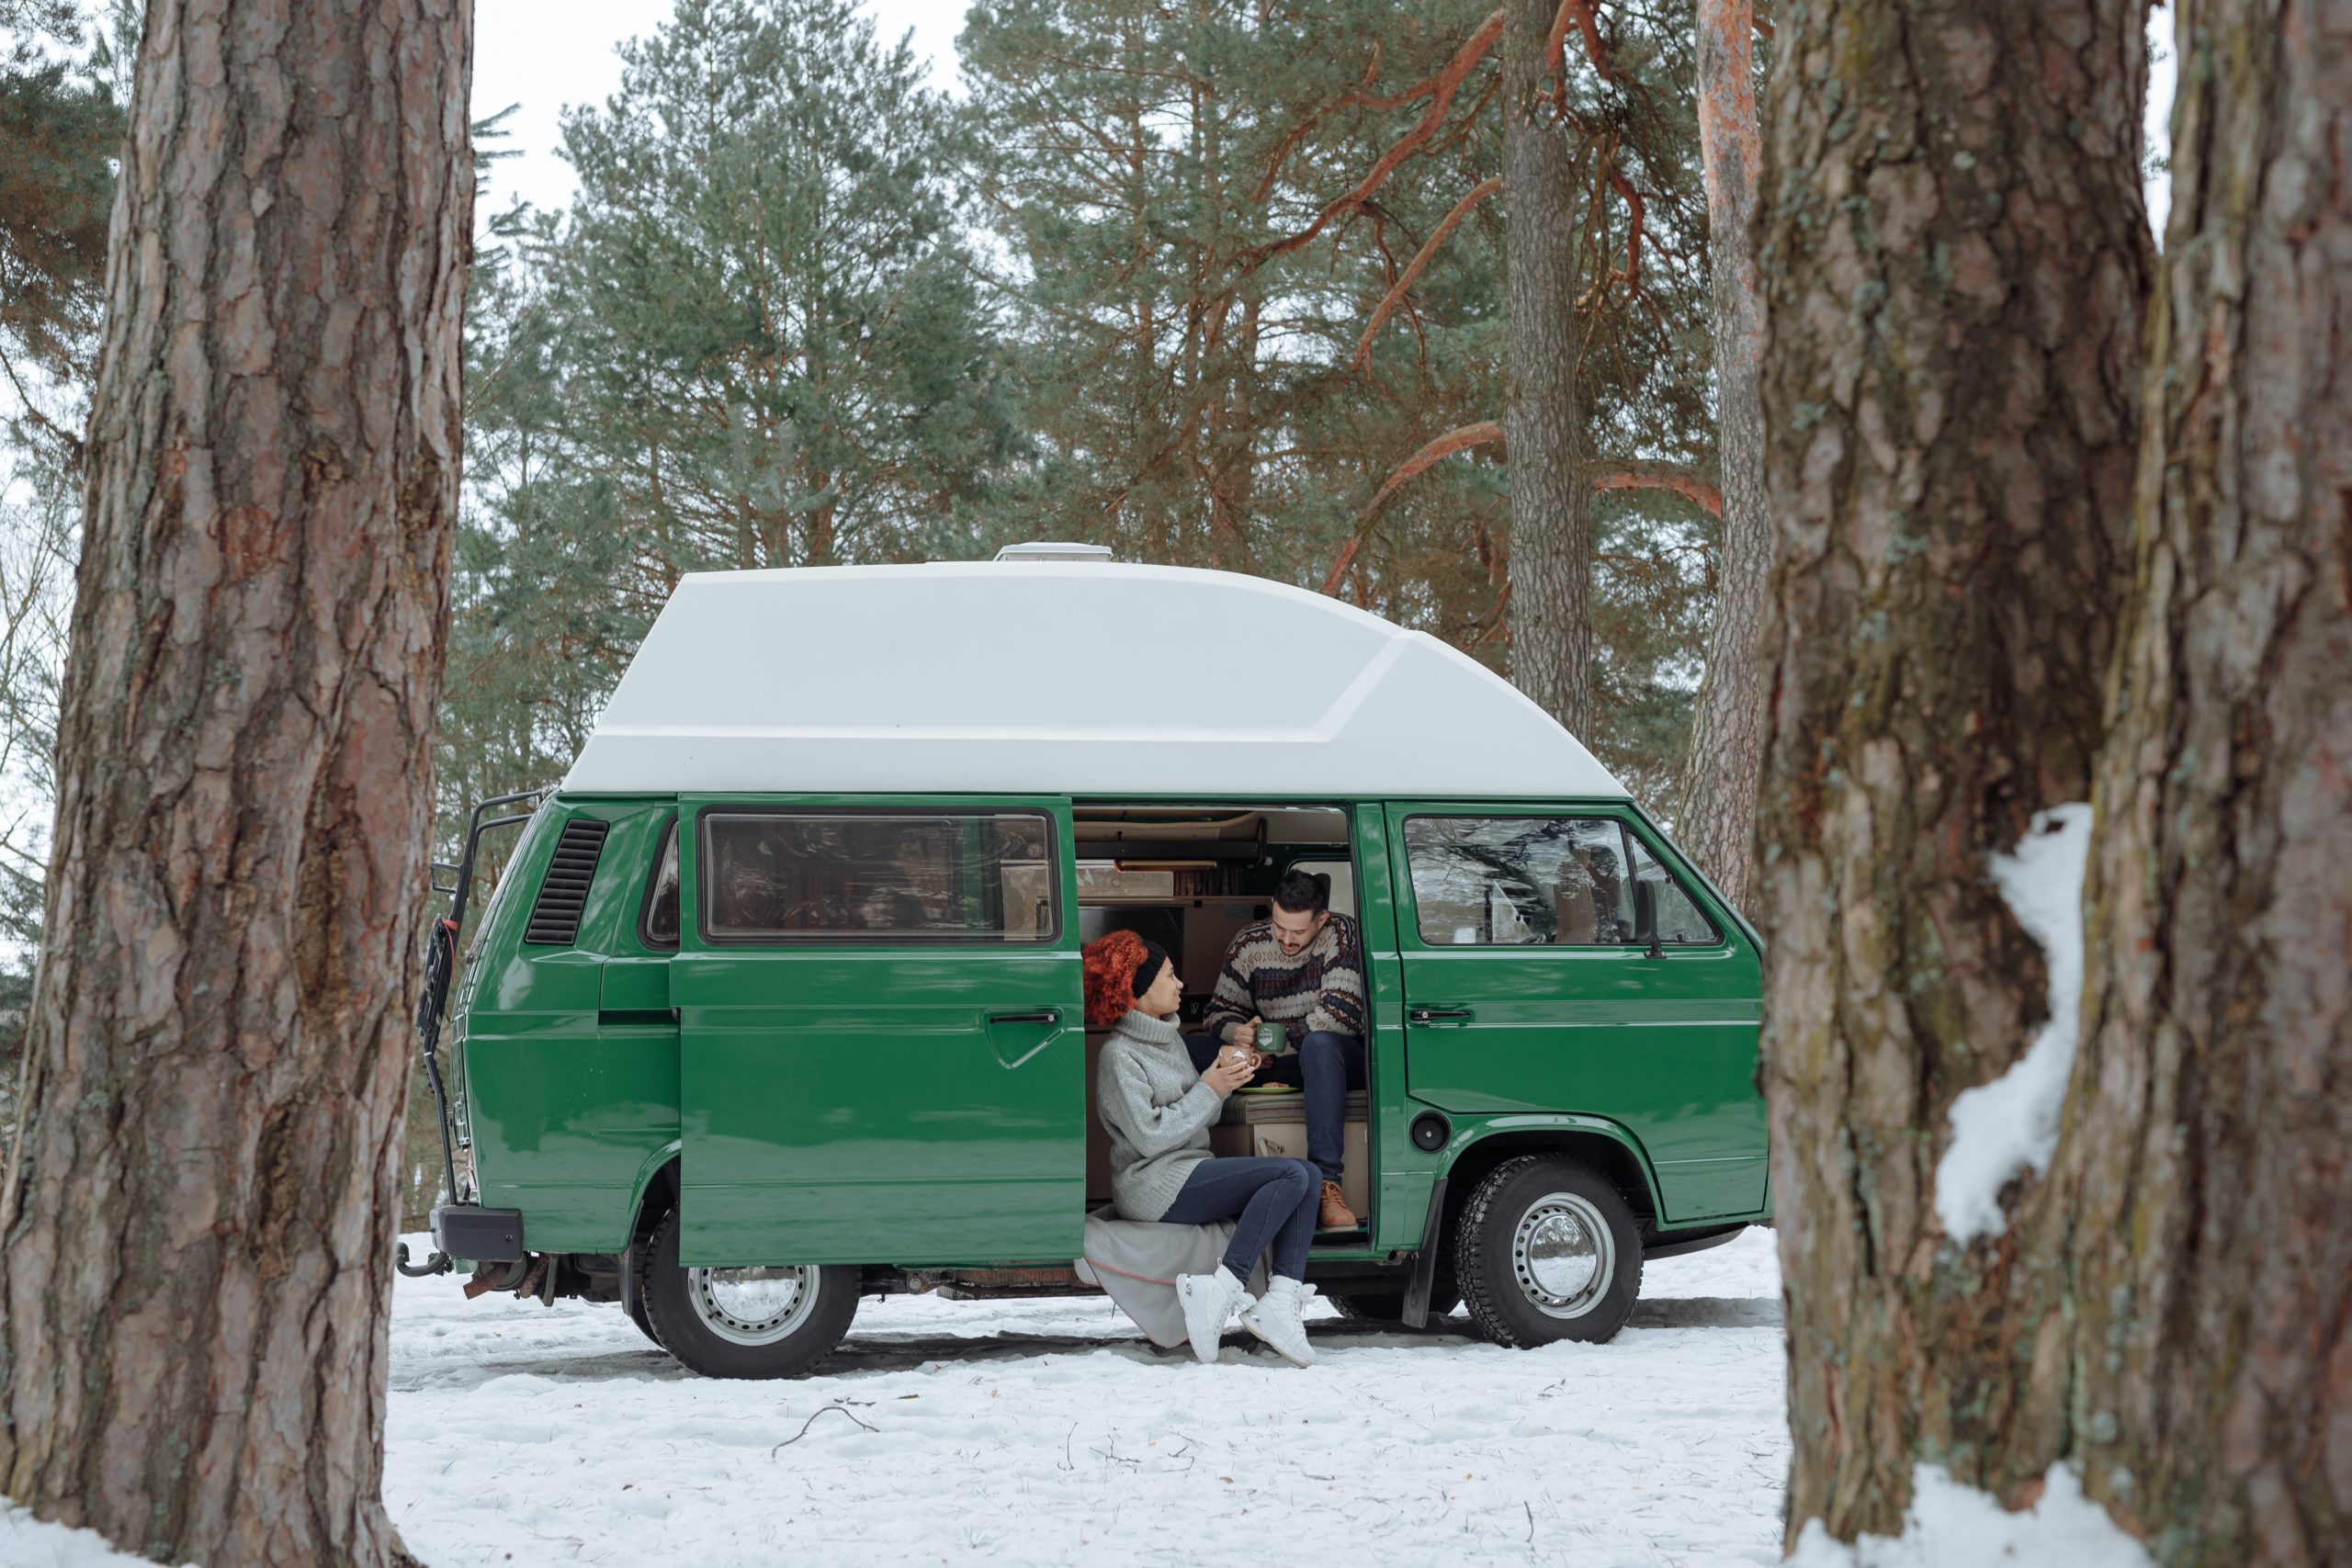 Two people sitting in the door of a van while parked in a snowy forest.